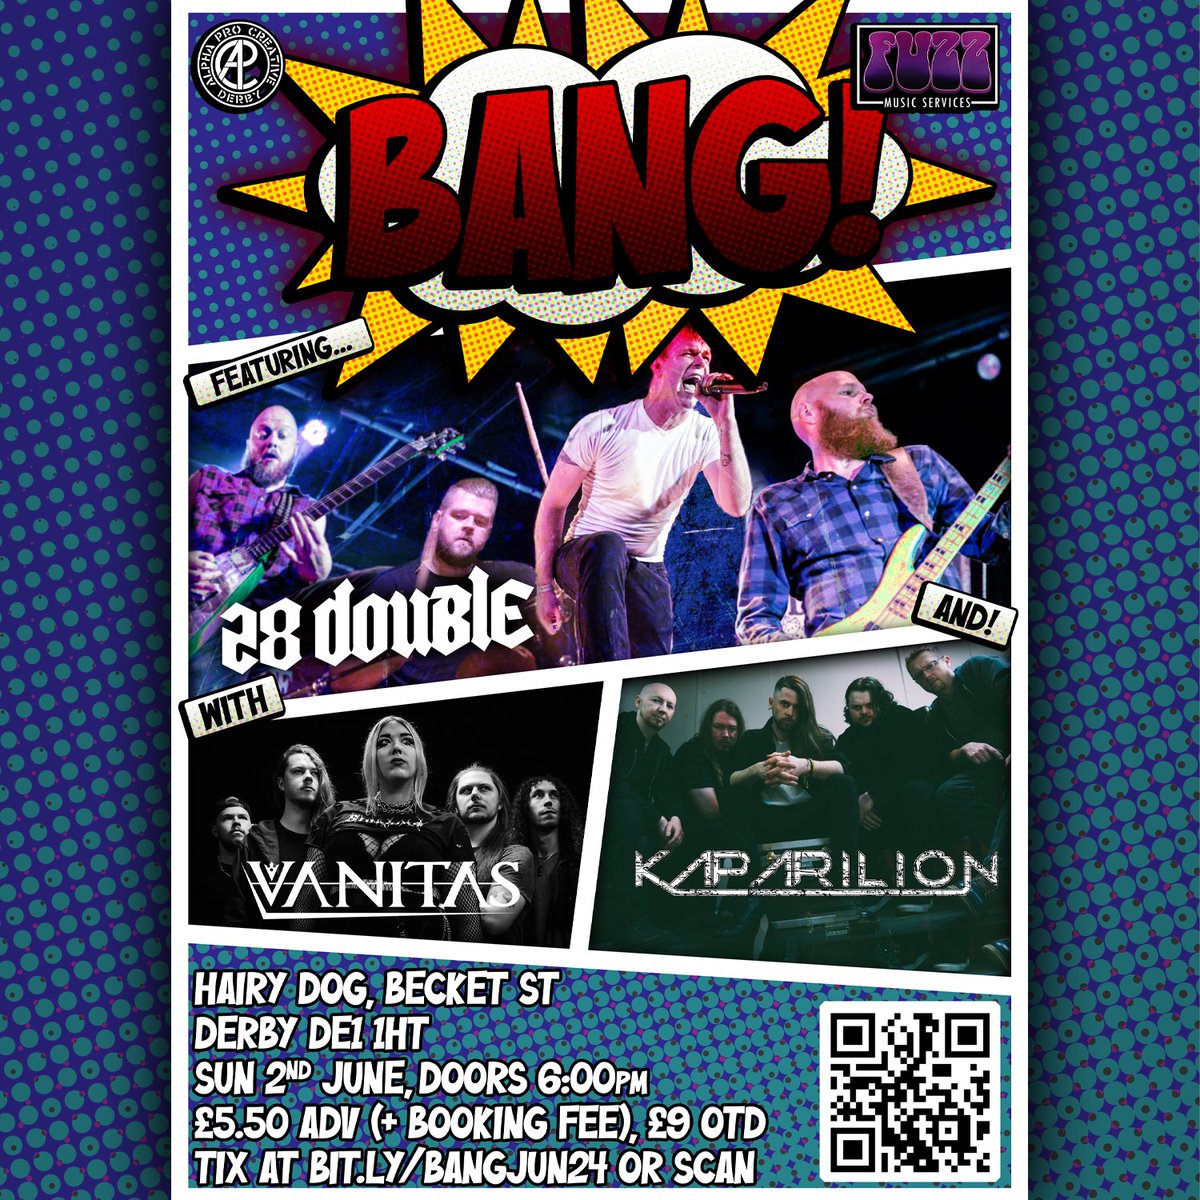 Our next BANG event will be taking place at The Hairy Dog on Sunday 2 June grab your early bird tickets now 👉 bit.ly/bangjun24 This time taking to the stage will be @28Double, Vanitas and @kaparilion!